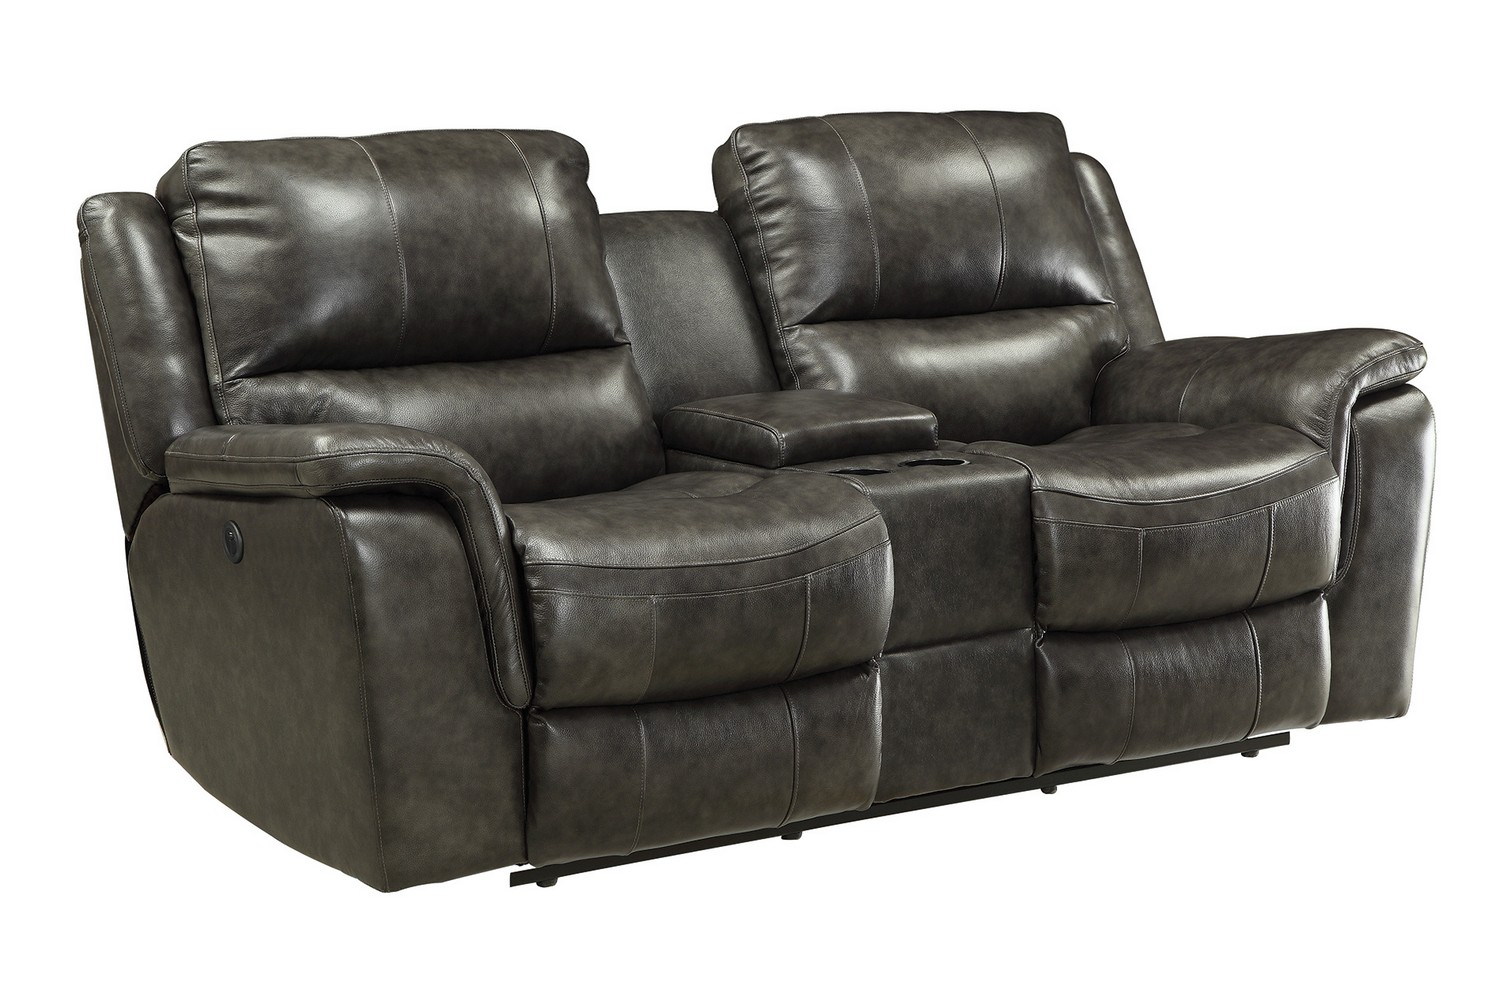 Coaster Wingfield Power Reclining Love Seat - Two Tone Charcoal